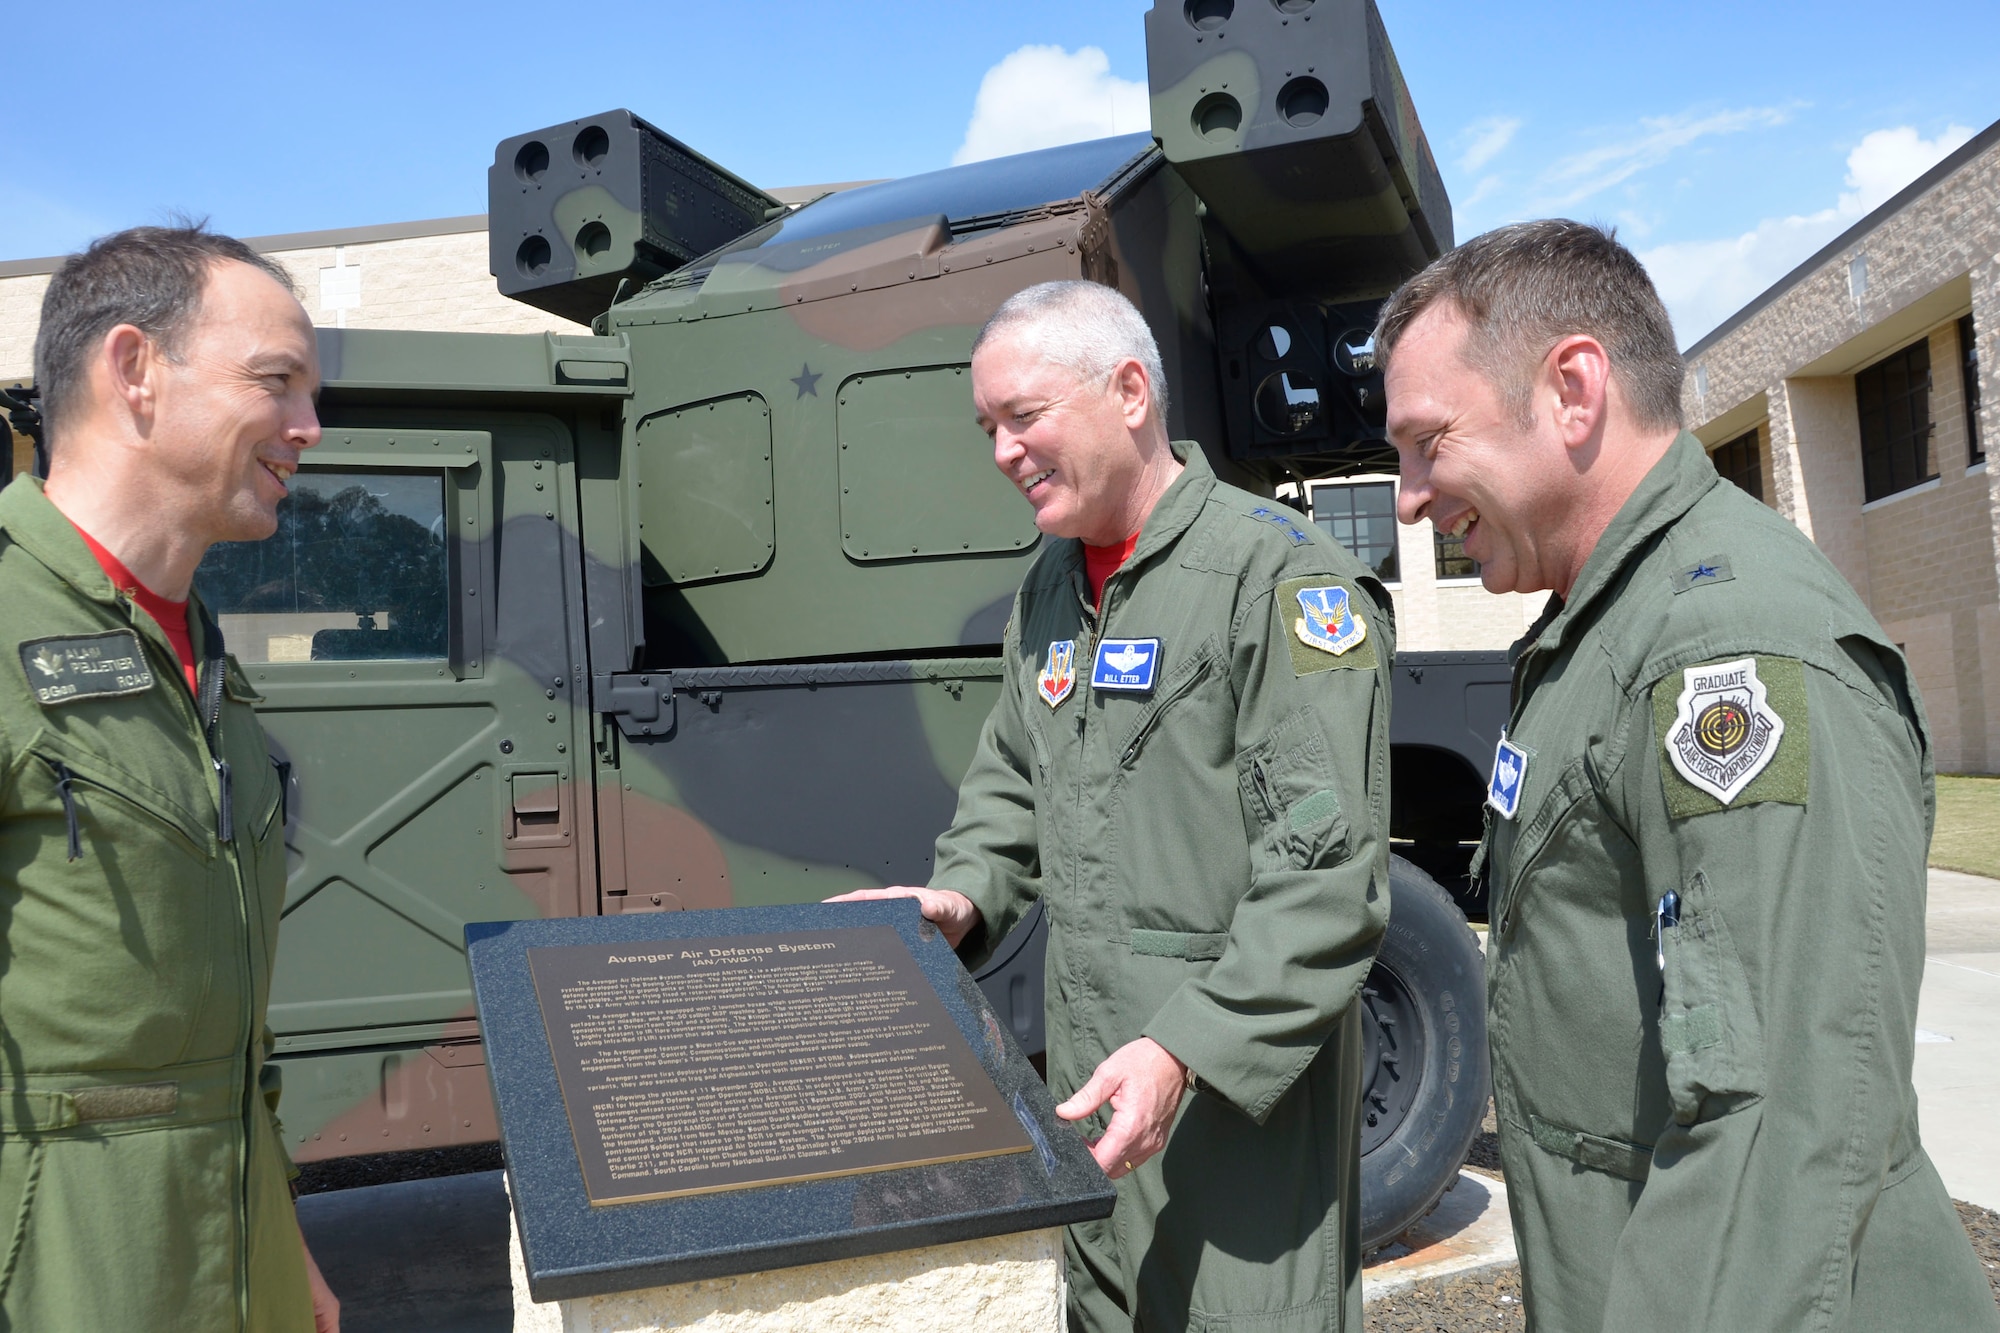 BGen. Alain Pelletier, Deputy Commander, Continental North American Aerospace Defense Region,  Lt. Gen. William Etter, Commander, Continental North American Aerospace Defense Region-1st Air Force (Air Forces Northern) and Brig. Gen. David Hicks, Vice Commander, 1st Air Forces Northern, look over the commemorative plaque of the Avenger Air -Defense System that arrived at the Killey Center for Homeland Operations Feb. 18.  